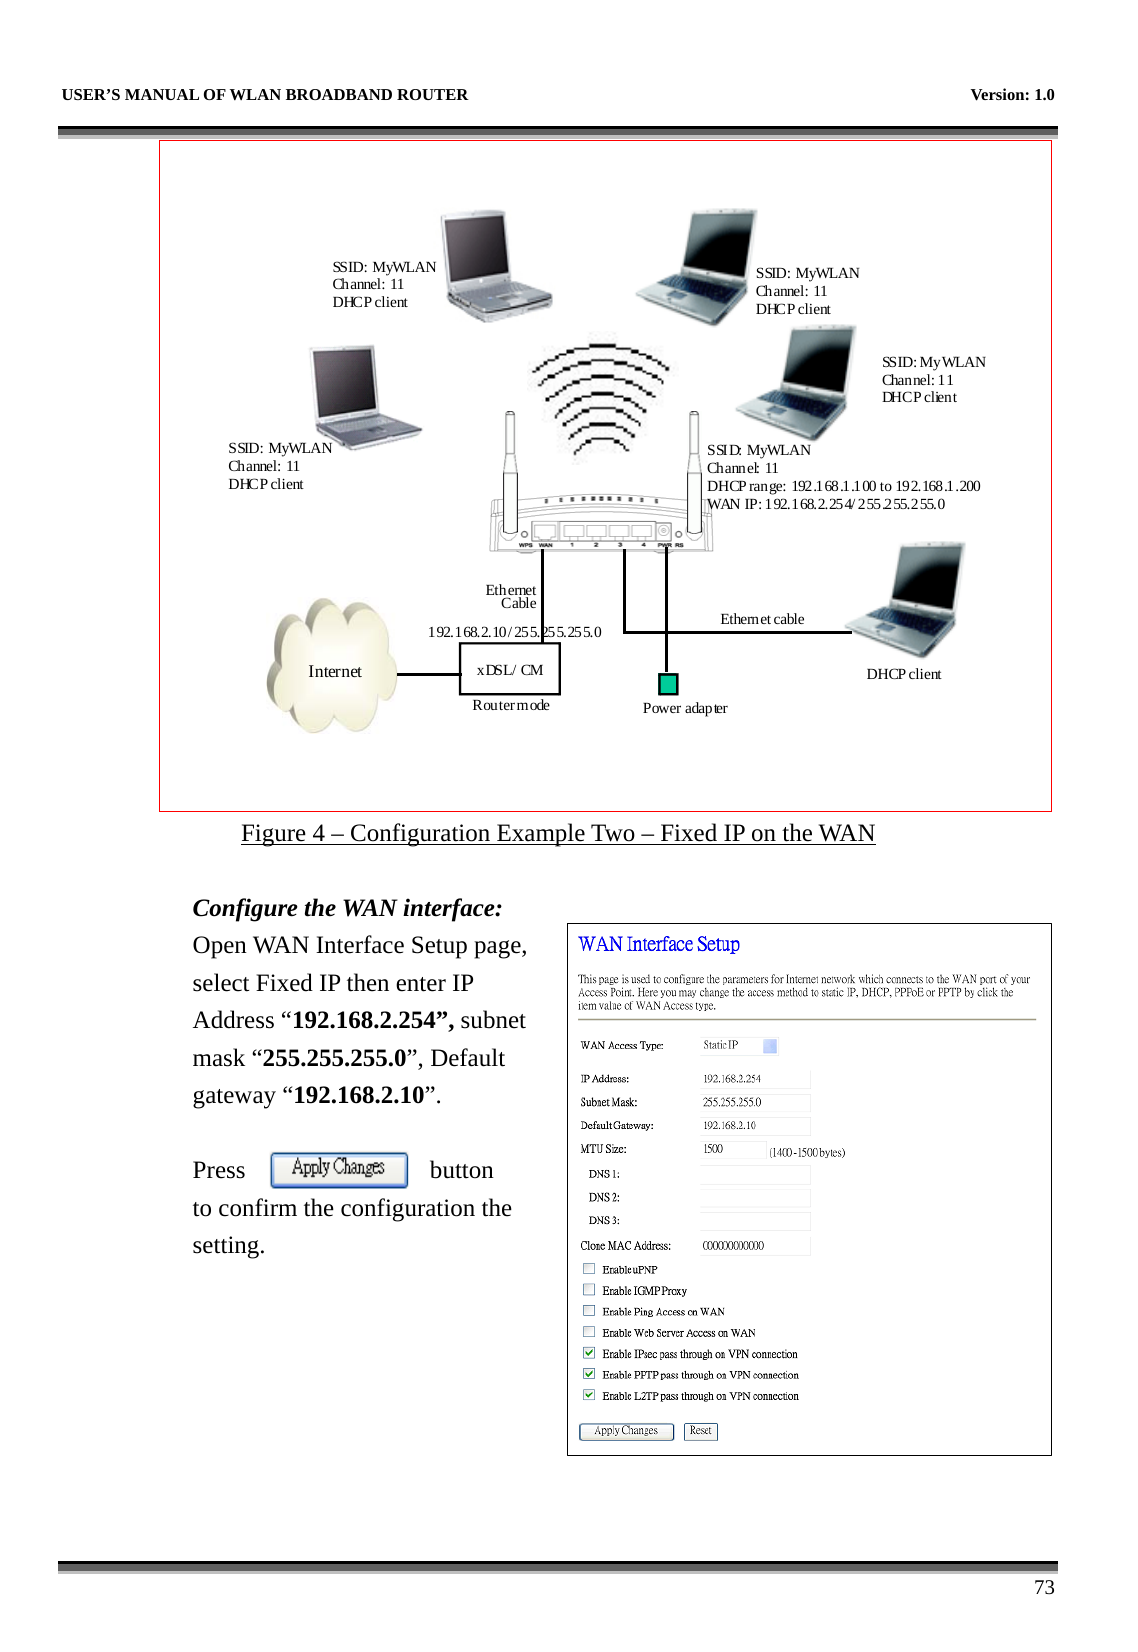   USER’S MANUAL OF WLAN BROADBAND ROUTER    Version: 1.0      73 Internet xDSL/ CMPower adapterEthernetCable Ethernet cableSS ID :  M y WL ANChannel: 11 DHC P c l ien tSSID: MyWLANChannel: 11 DHCP clientSSID: MyWLANChannel: 11 DHCP clientSSID: MyWLANChannel: 11 DHCP clientDHCP clientR ou ter m odeSSID: MyWLANCh ann el: 11DHCP range: 192.168.1.100 to 192.168.1.200WAN IP: 192.168.2.254/ 255 .255.255.01 92.1 68.2. 10 / 25 5. 25 5.25 5. 0 Figure 4 – Configuration Example Two – Fixed IP on the WAN  Configure the WAN interface: Open WAN Interface Setup page, select Fixed IP then enter IP Address “192.168.2.254”, subnet mask “255.255.255.0”, Default gateway “192.168.2.10”.  Press  button   to confirm the configuration the setting.        